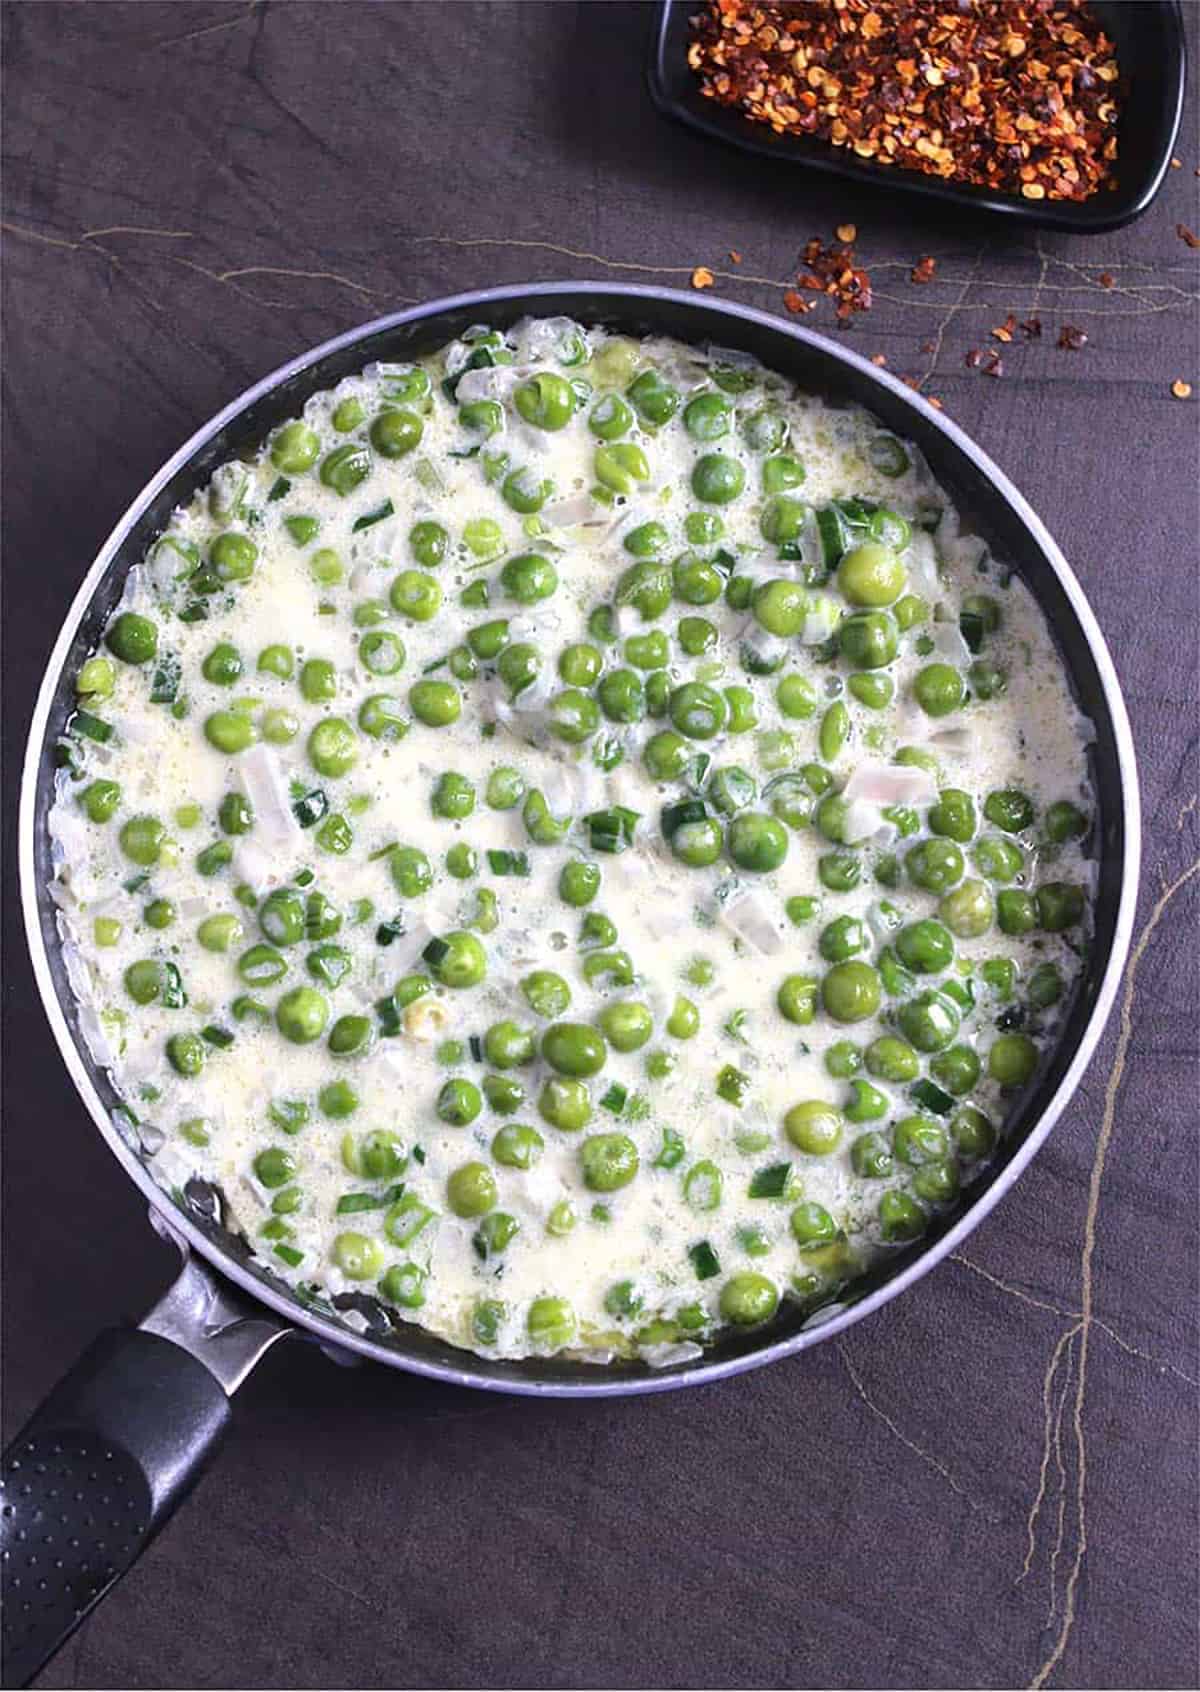 Top view of creamed peas in a nonstick pan.